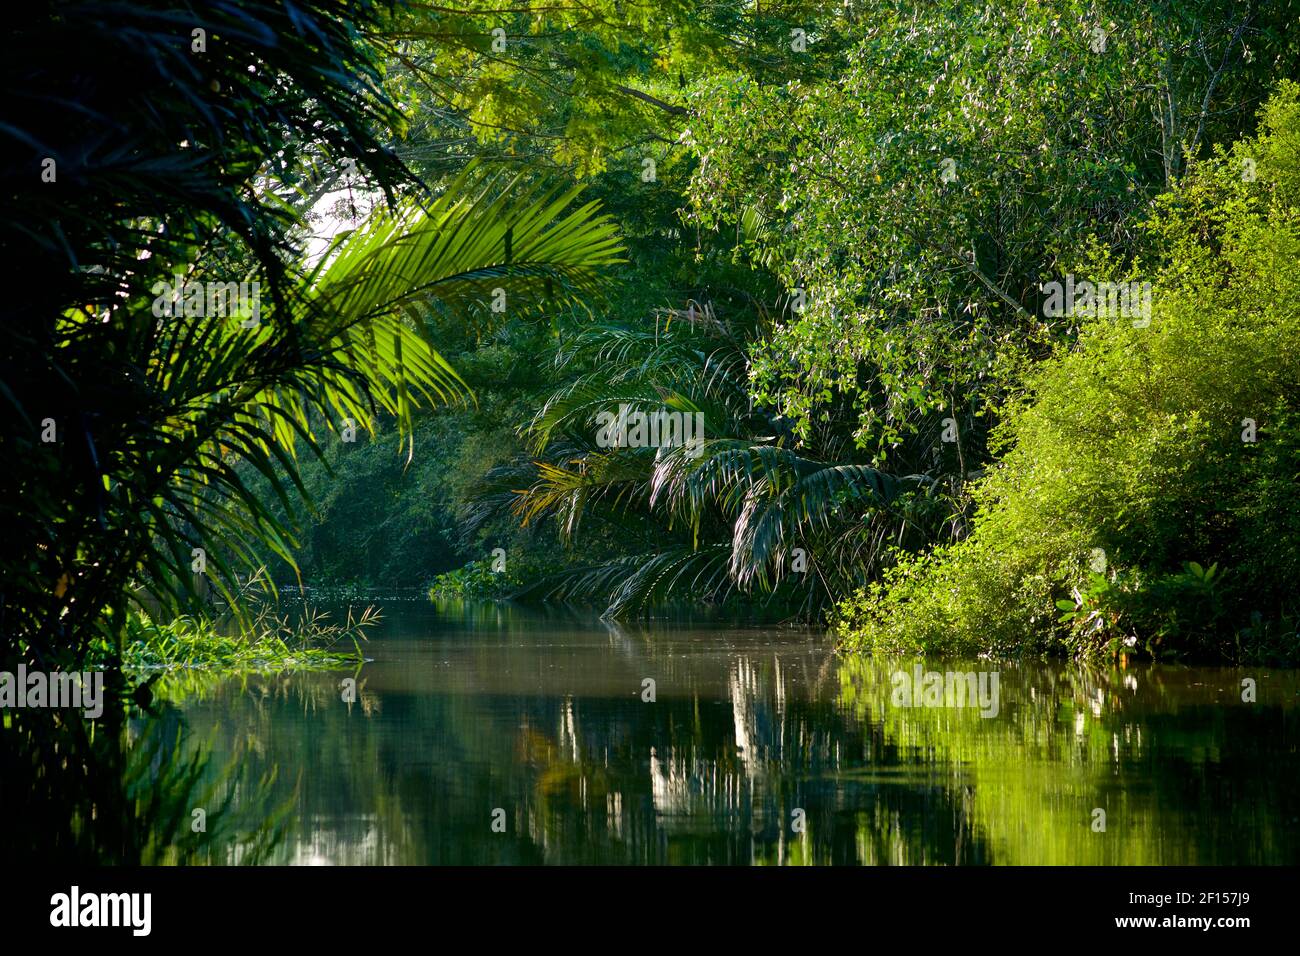 Lush vegetation of the canals near Can Tho, Mekong Delta, Southern Vietnam Stock Photo